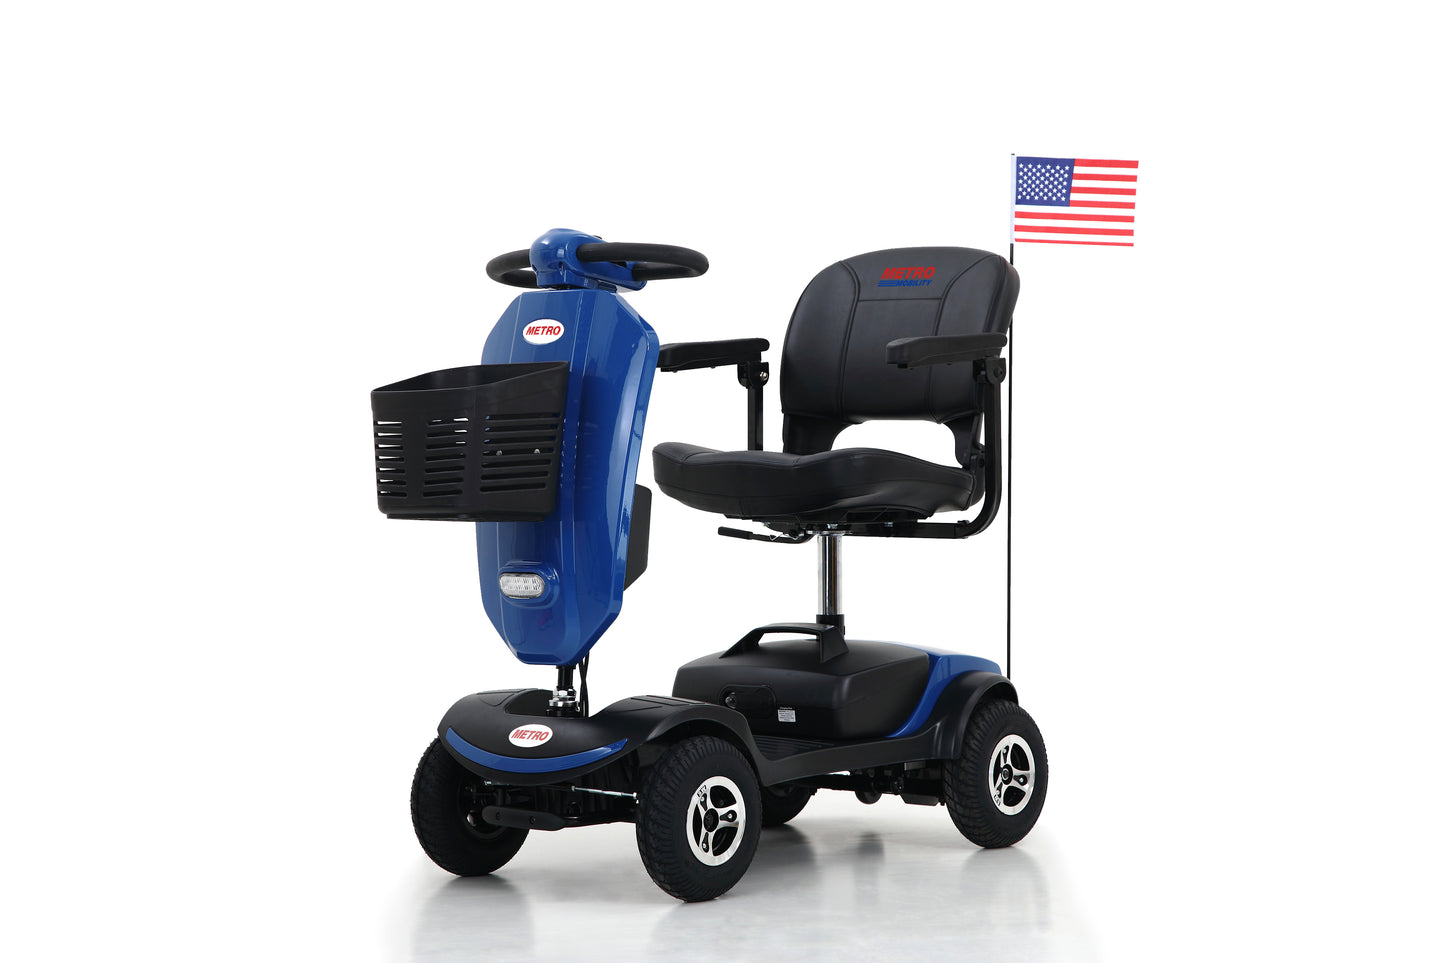 Metro Patriot Mobility Scooter - Blue